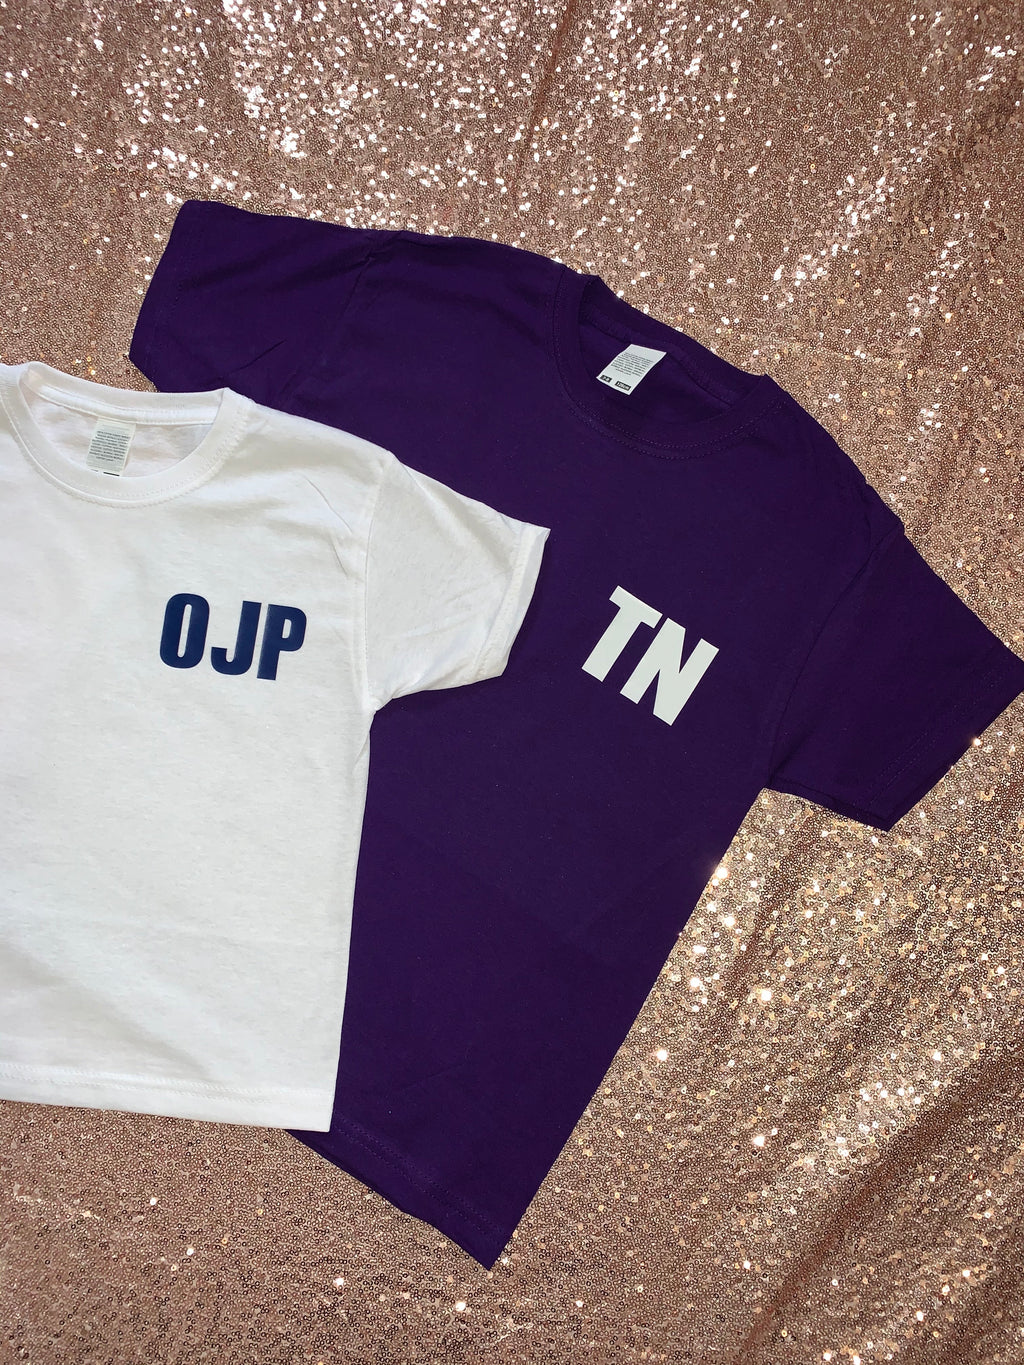 Initial Tops (age 1 - 4)